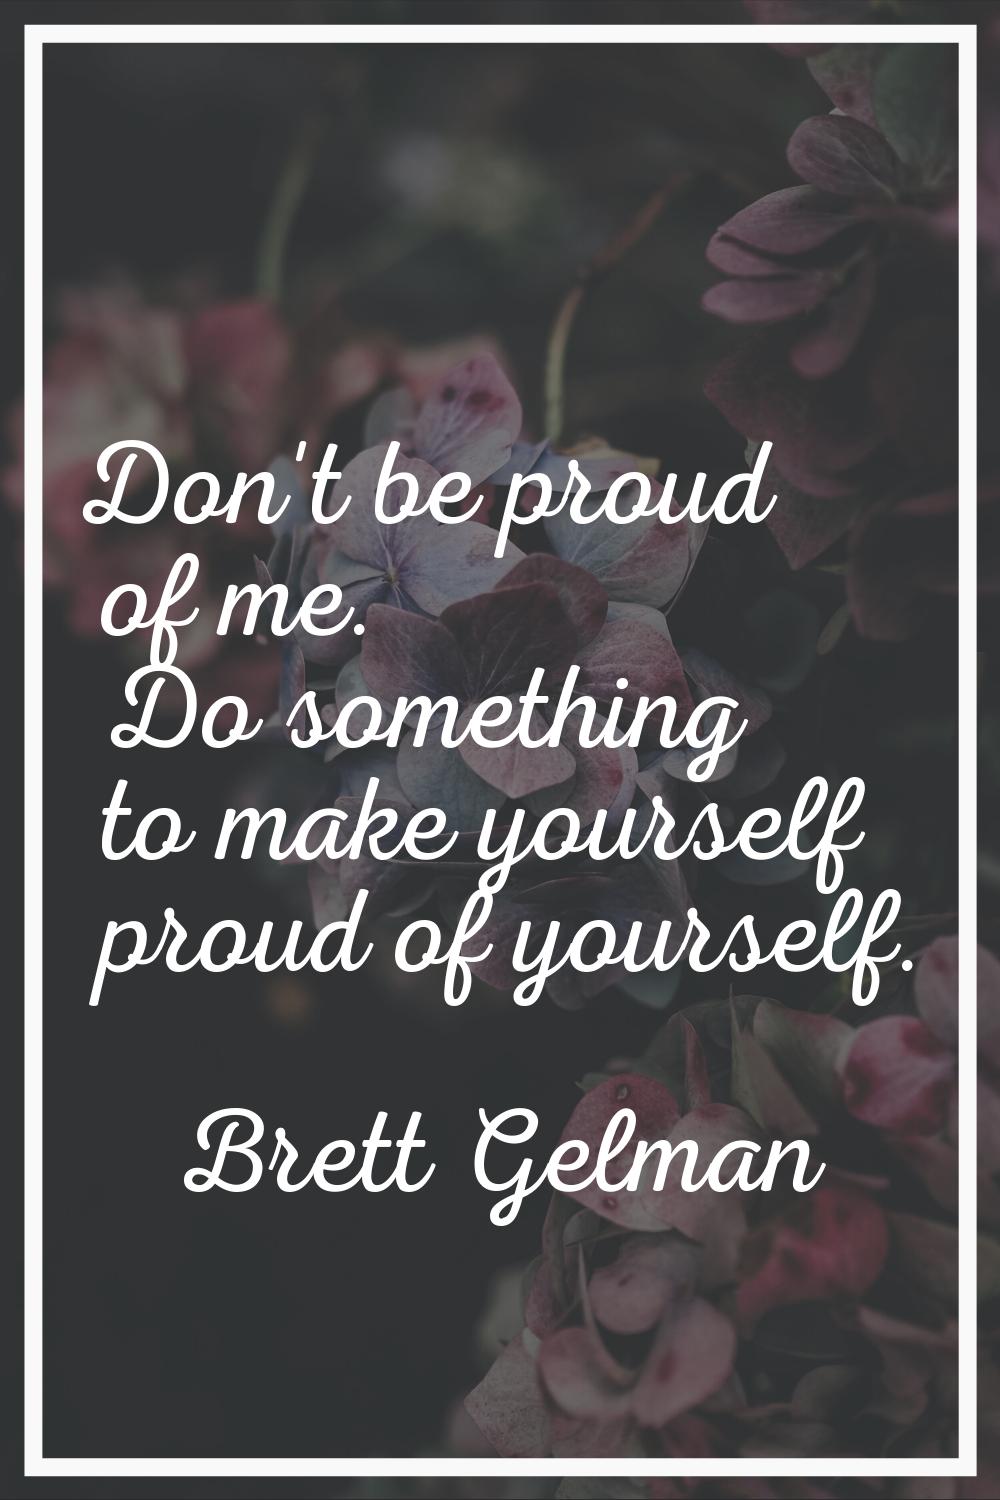 Don't be proud of me. Do something to make yourself proud of yourself.